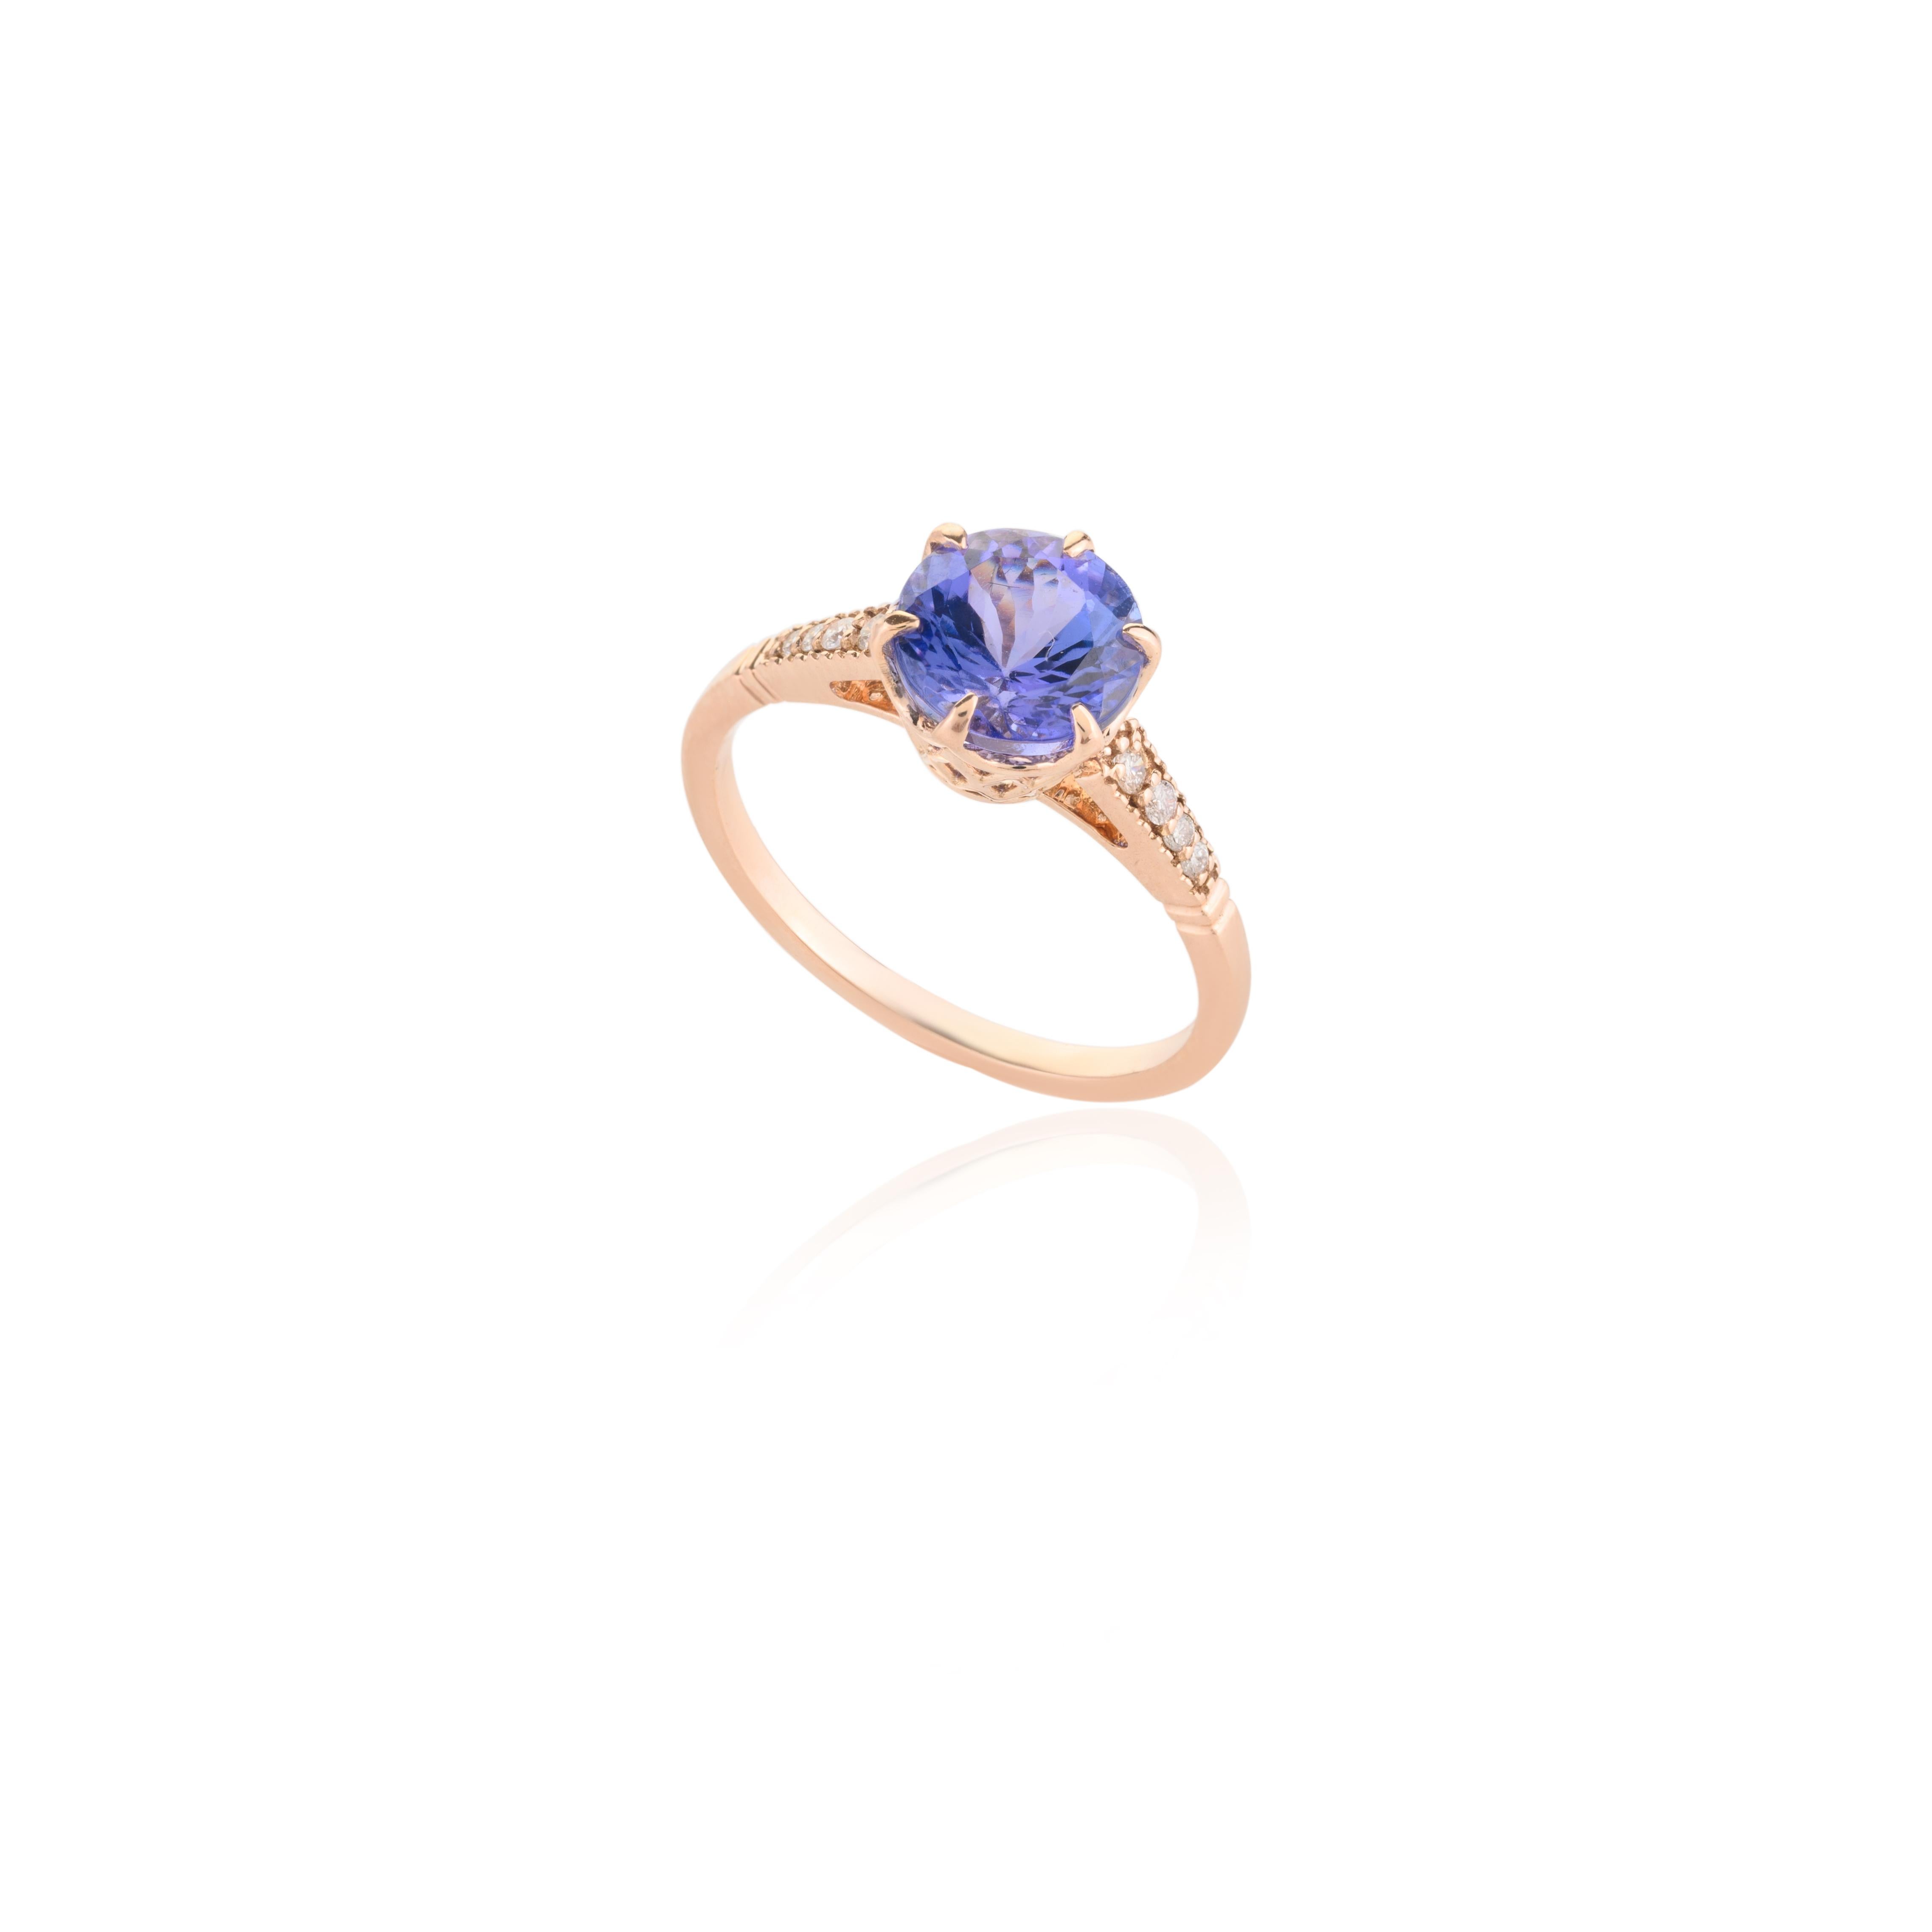 For Sale:  Genuine 1.68 Cts Tanzanite and Diamond Engagement Ring in 18k Solid Rose Gold 3